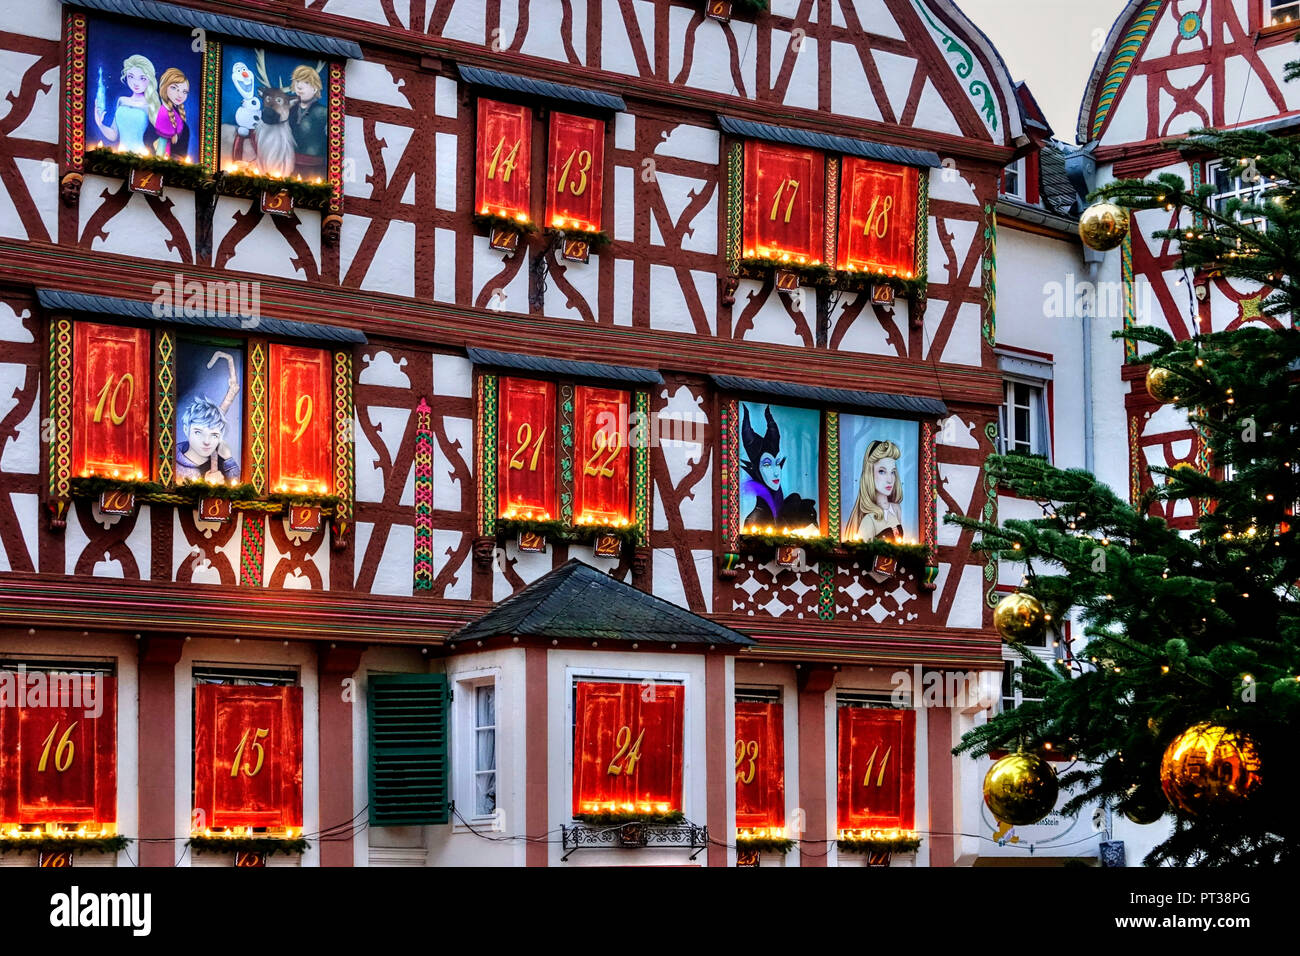 Advent calendar house at market place in Christmas time, Bernkastel-Kues, Mosel valley, Rhineland-Palatinate, Germany Stock Photo